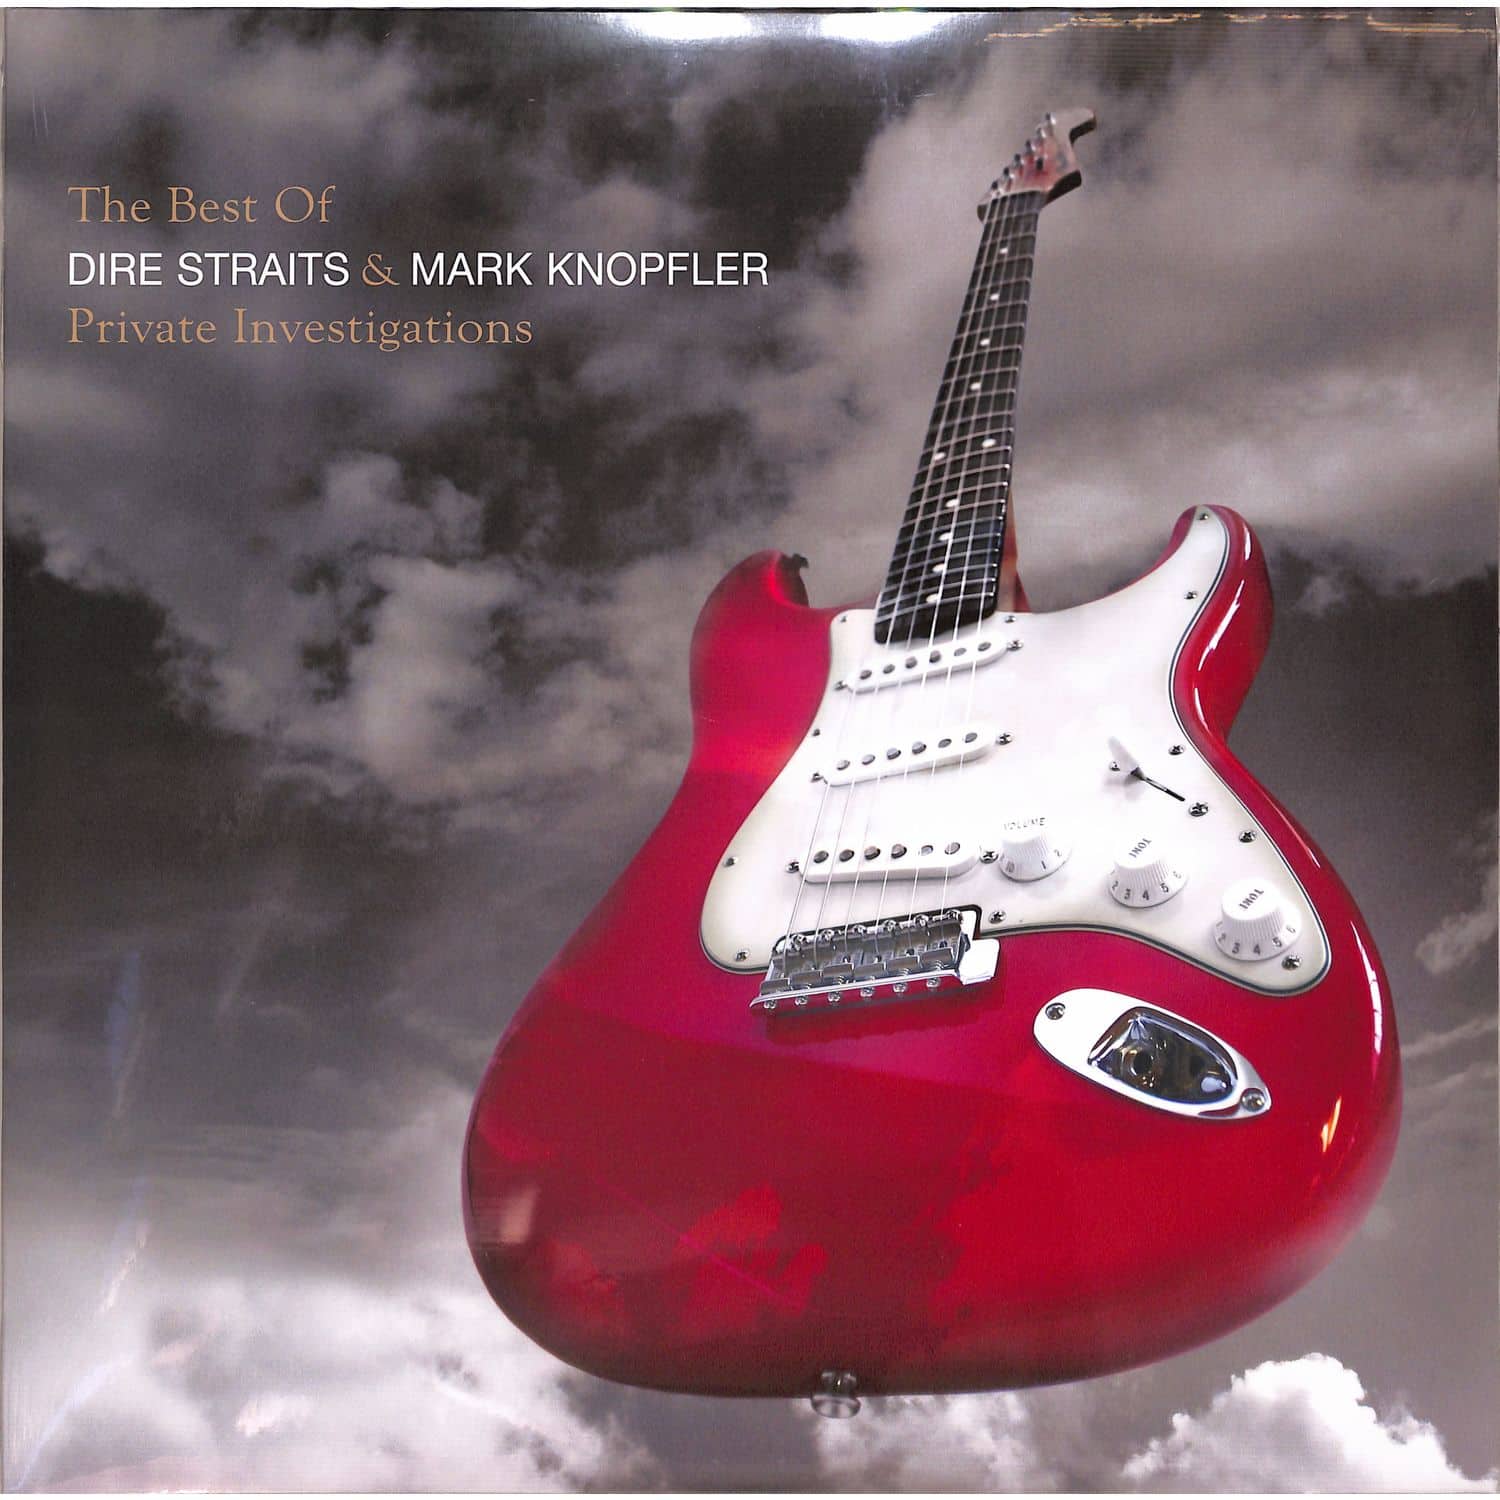 Dire Straits & Mark Knopfler - PRIVATE INVESTIGATION - THE BEST OF 